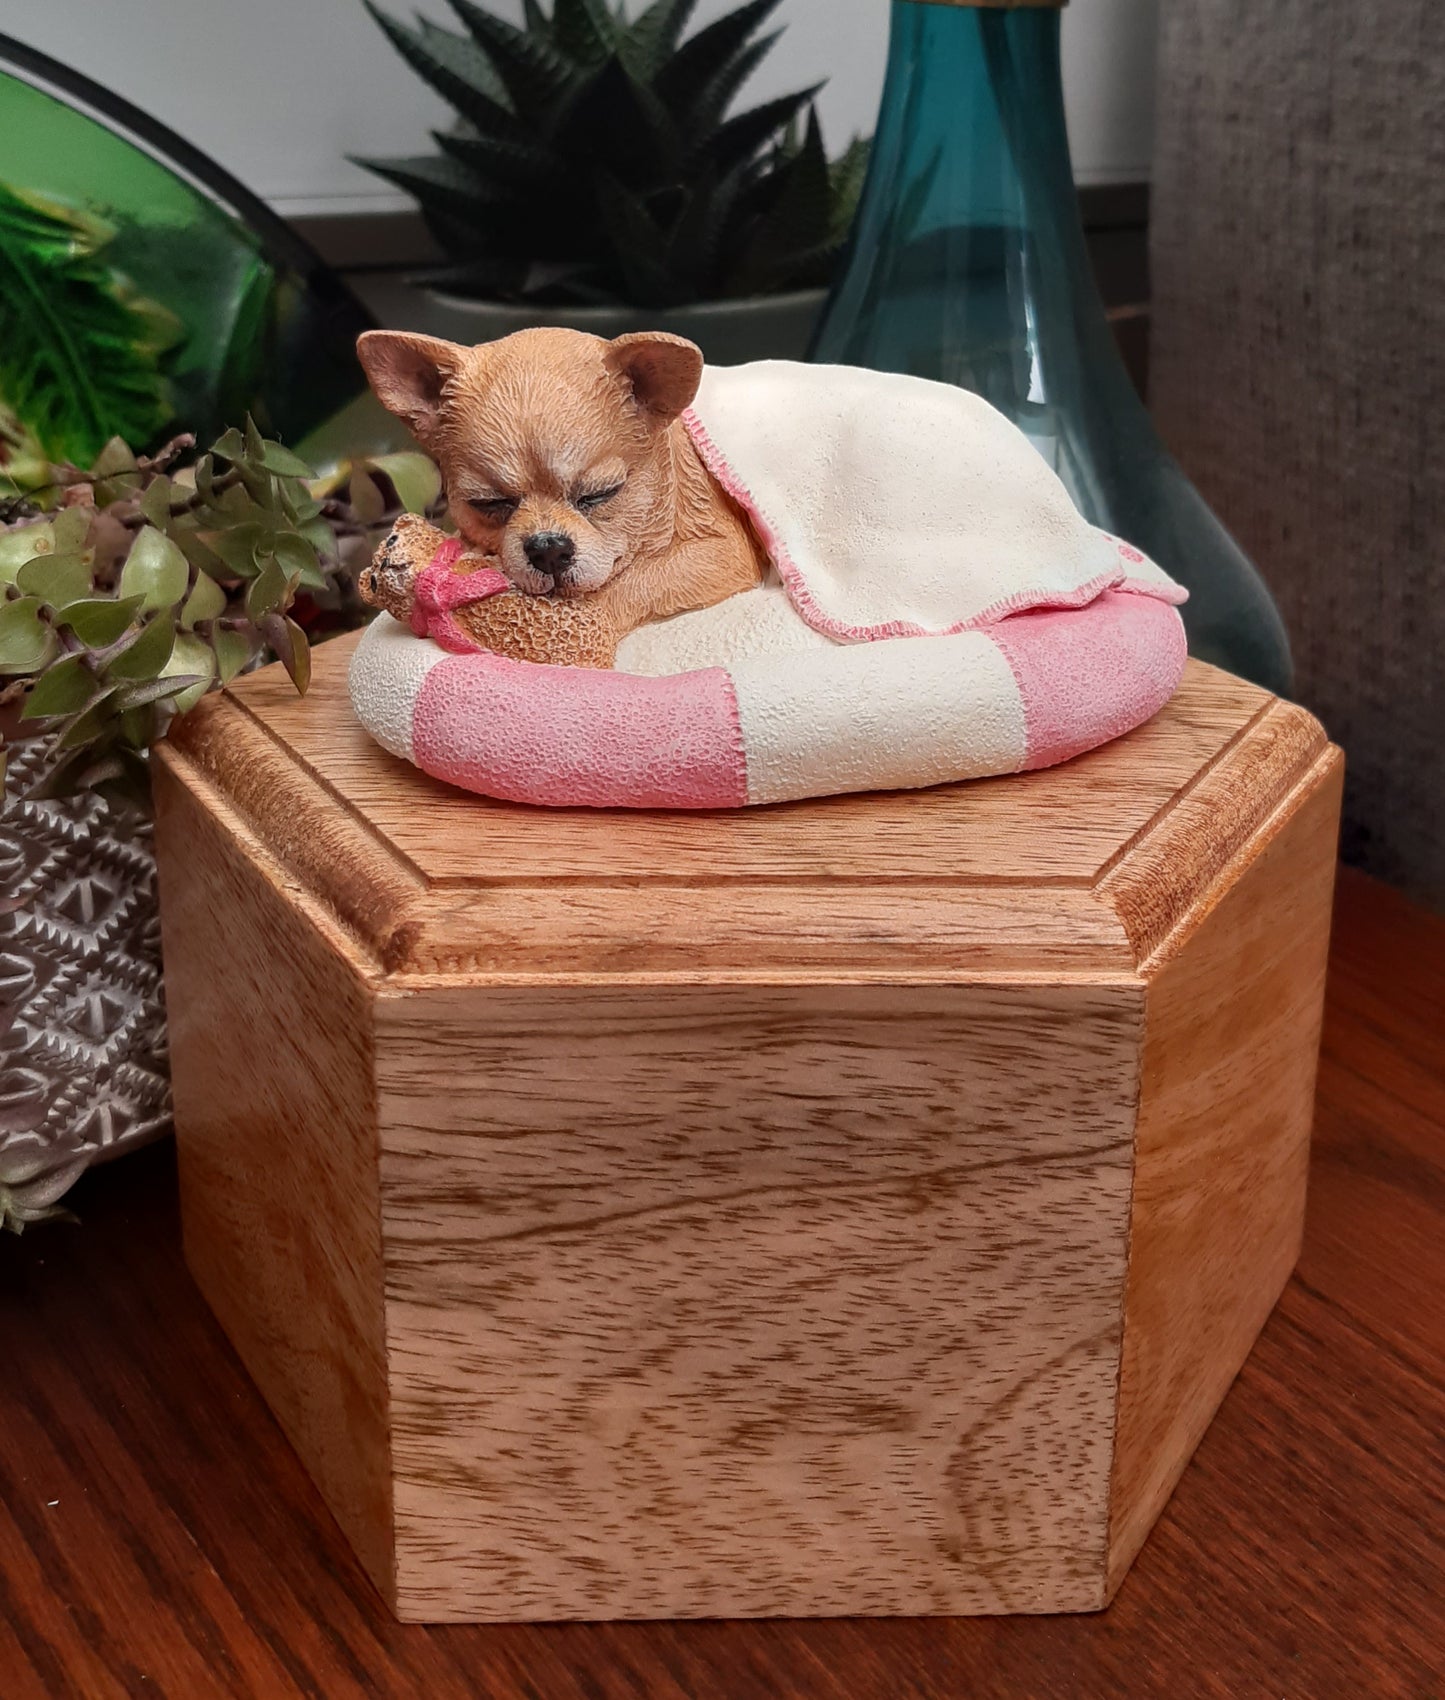 Wooden Cremation Urn For Short Coated Chihuahua Pet Ashes